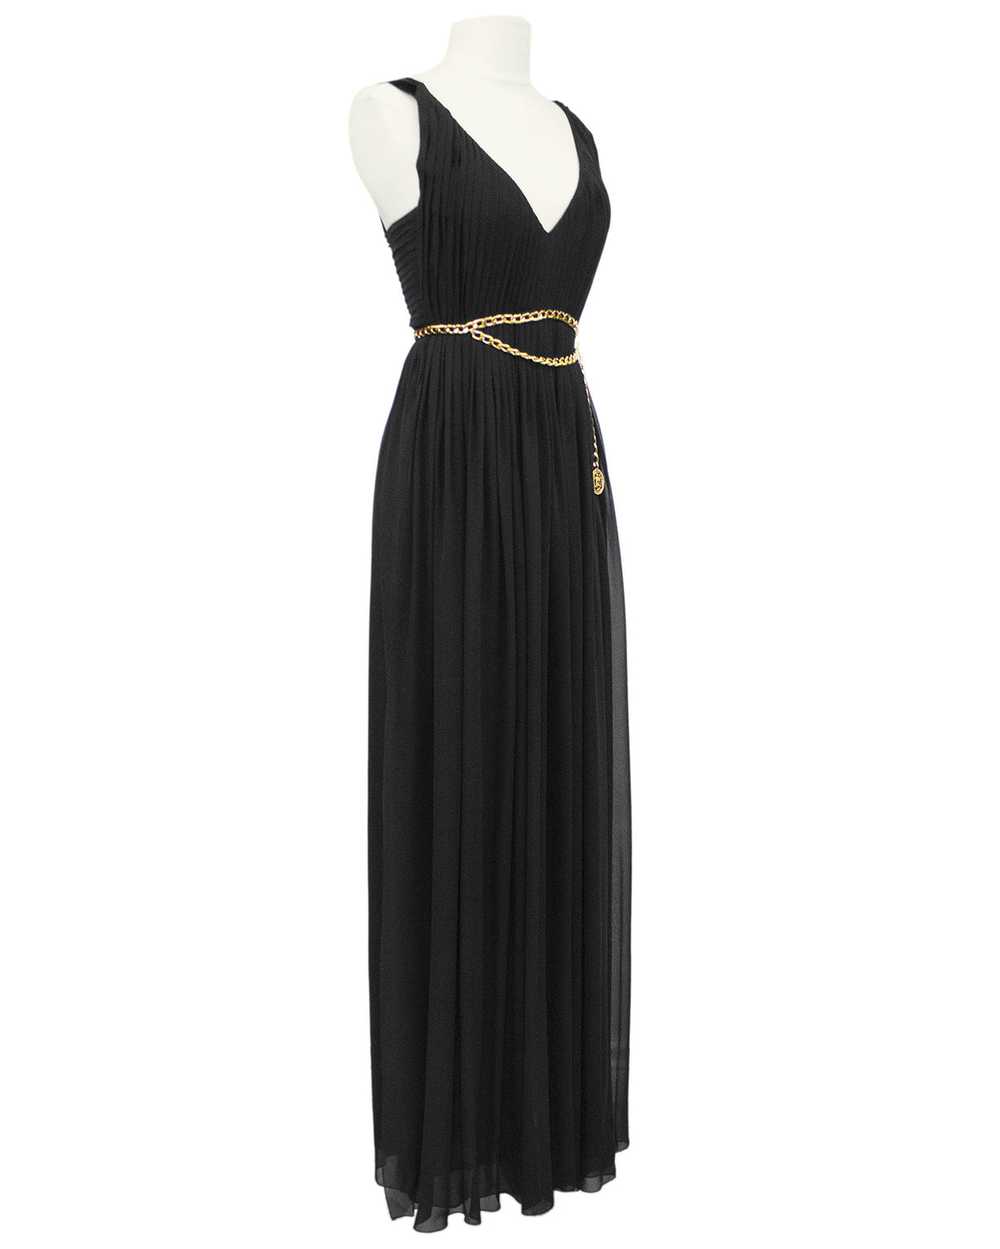 Chanel Black Chiffon Gown with Gold Chain Belt - image 1